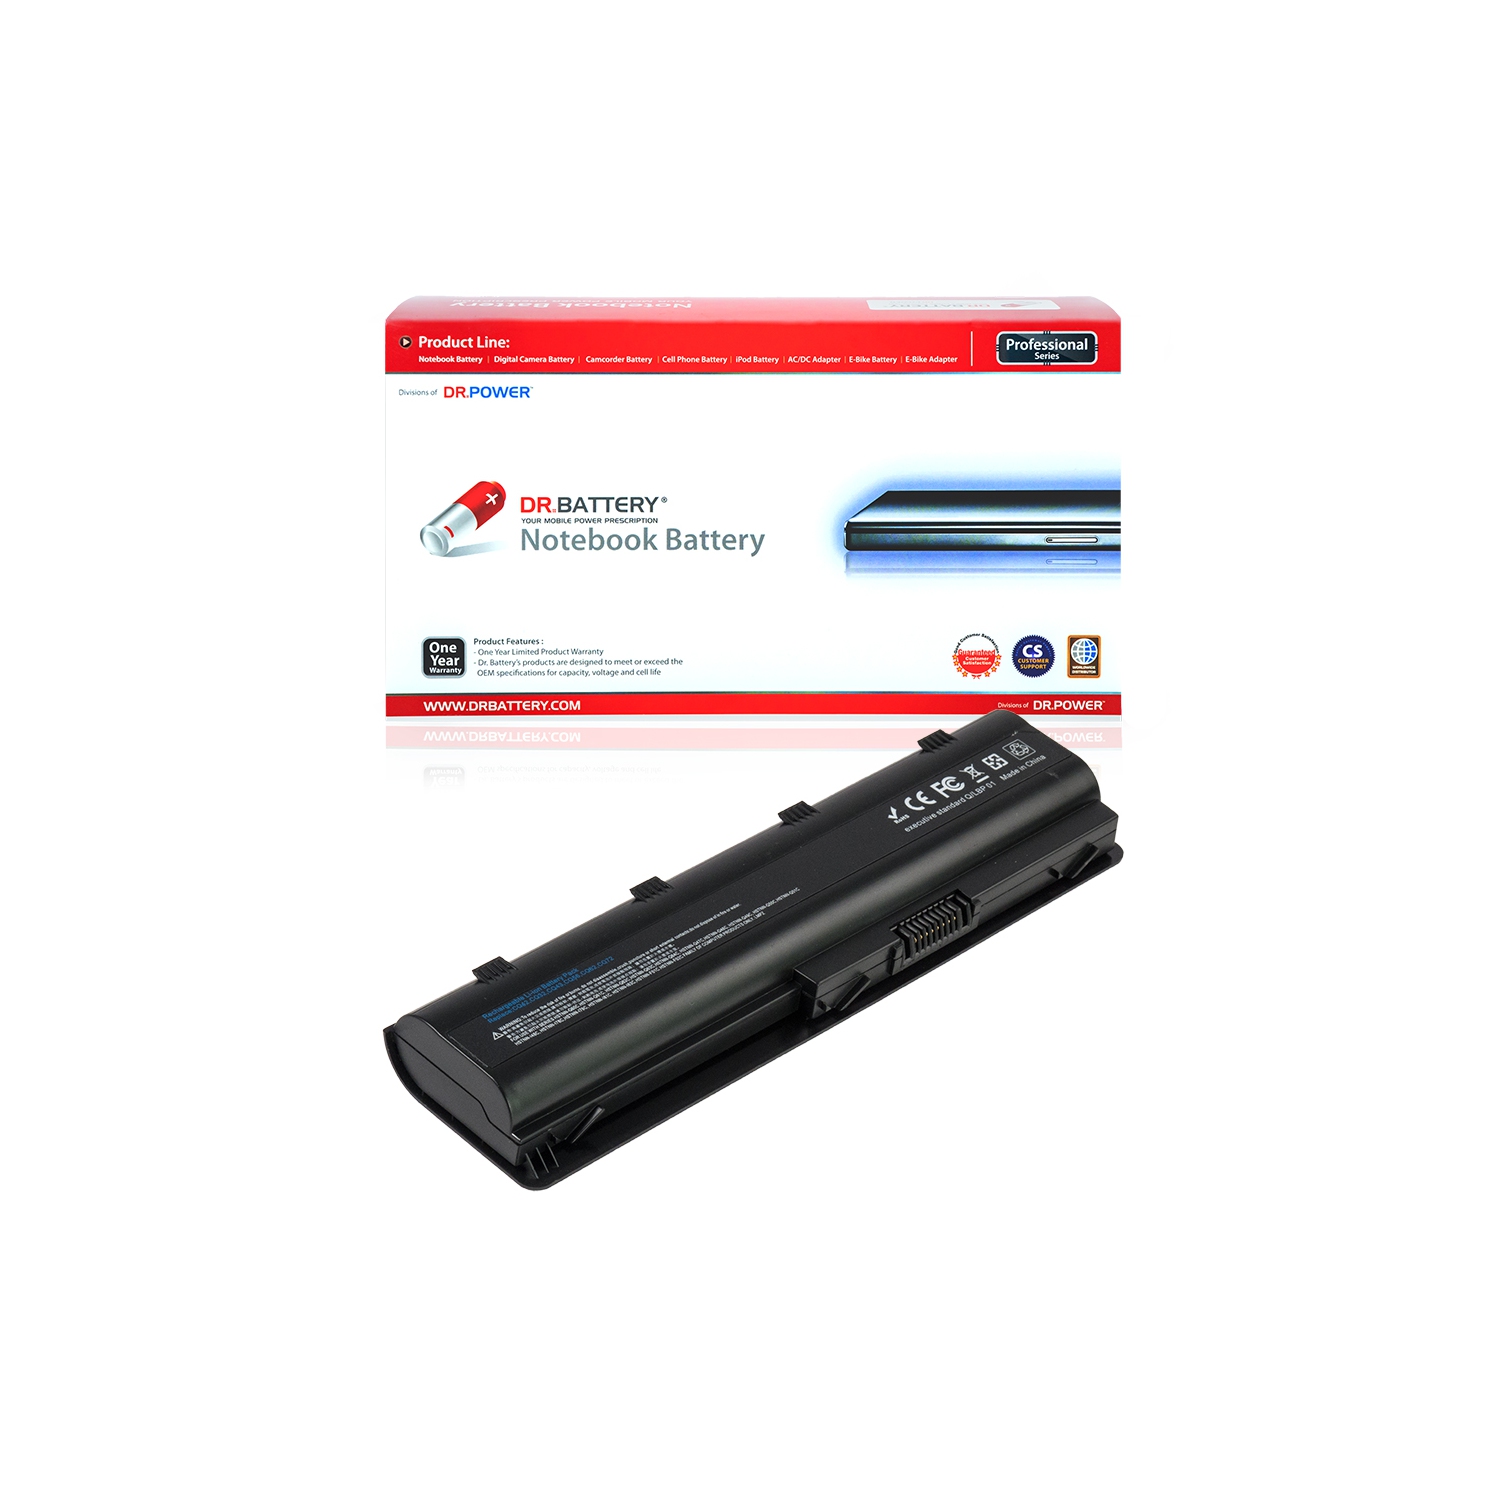 DR. BATTERY - Replacement for HP 2000 / 630 / 635 / ENVY 17 / G62 / G72 / 593554-001 / 593562-001 / 636631-001 / HSTNN-CBOX